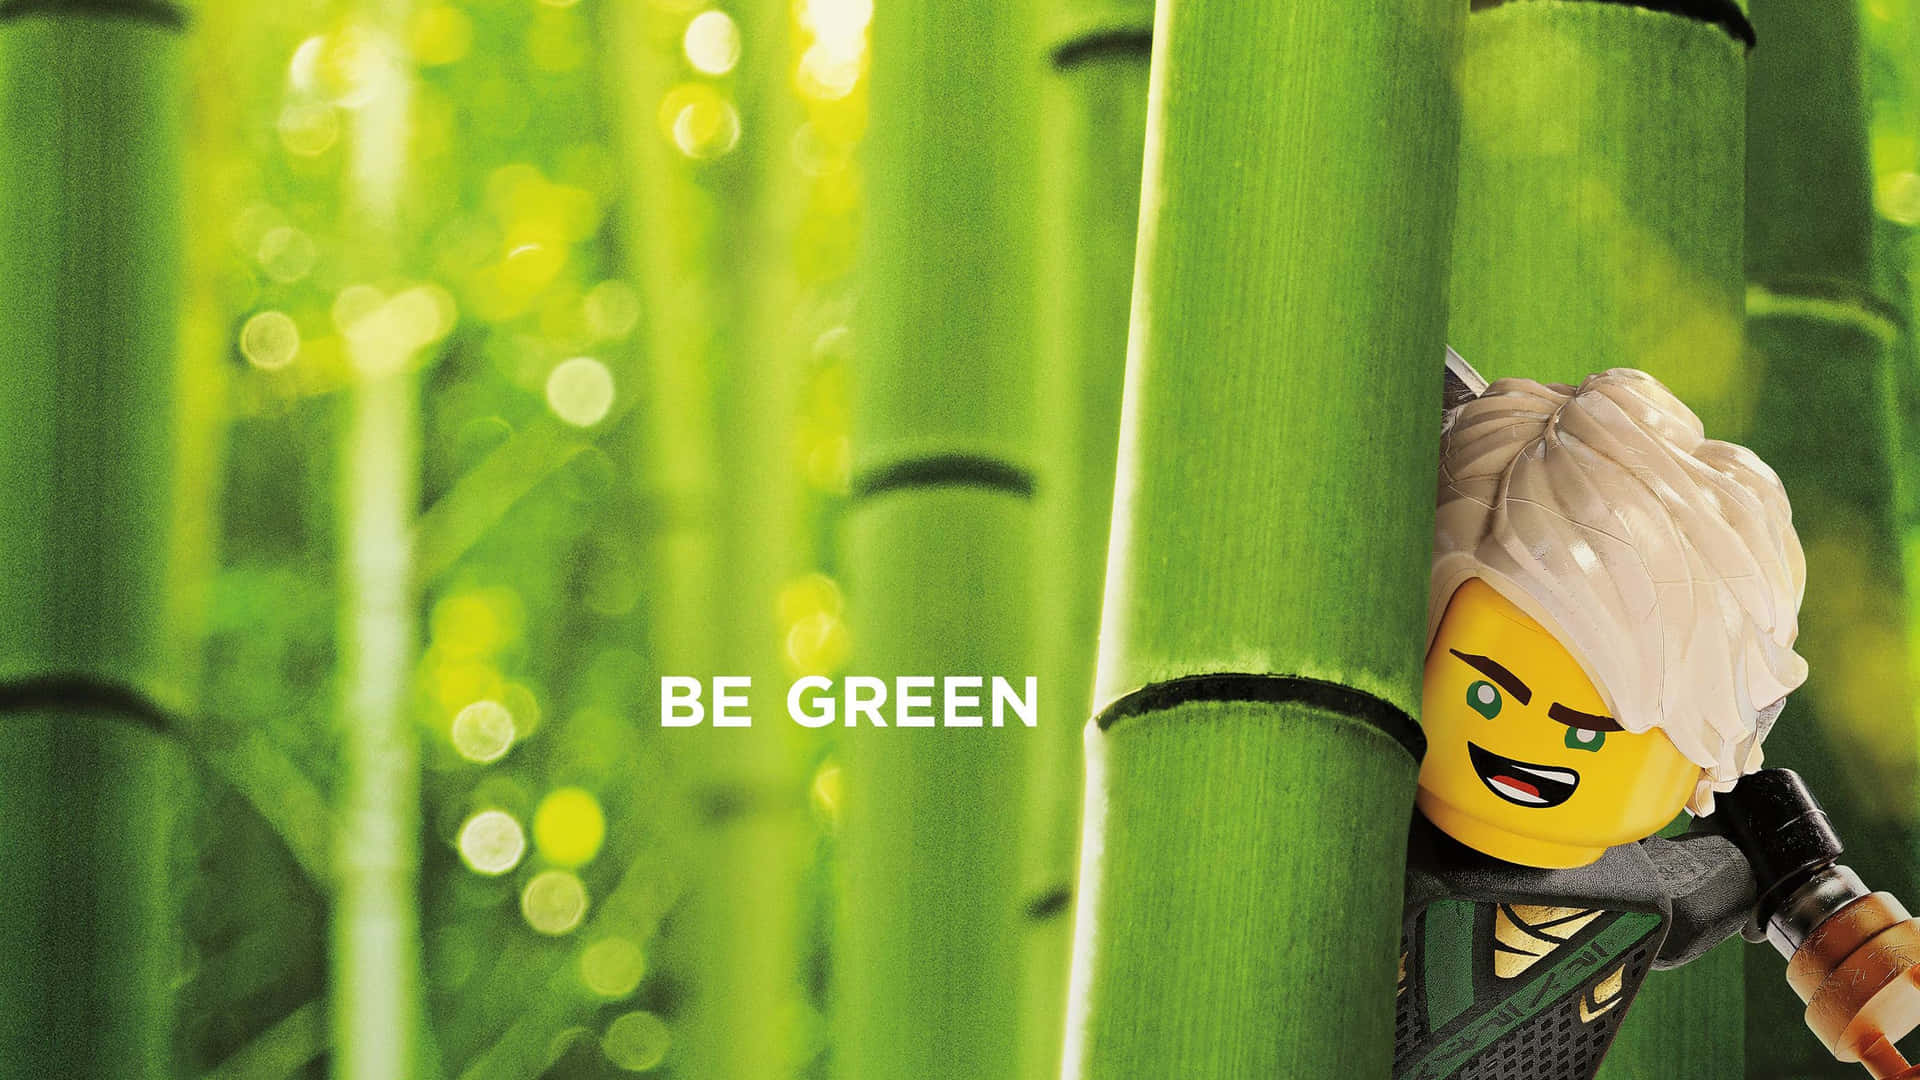 The Ninjago heroes assemble for an epic battle against evil forces